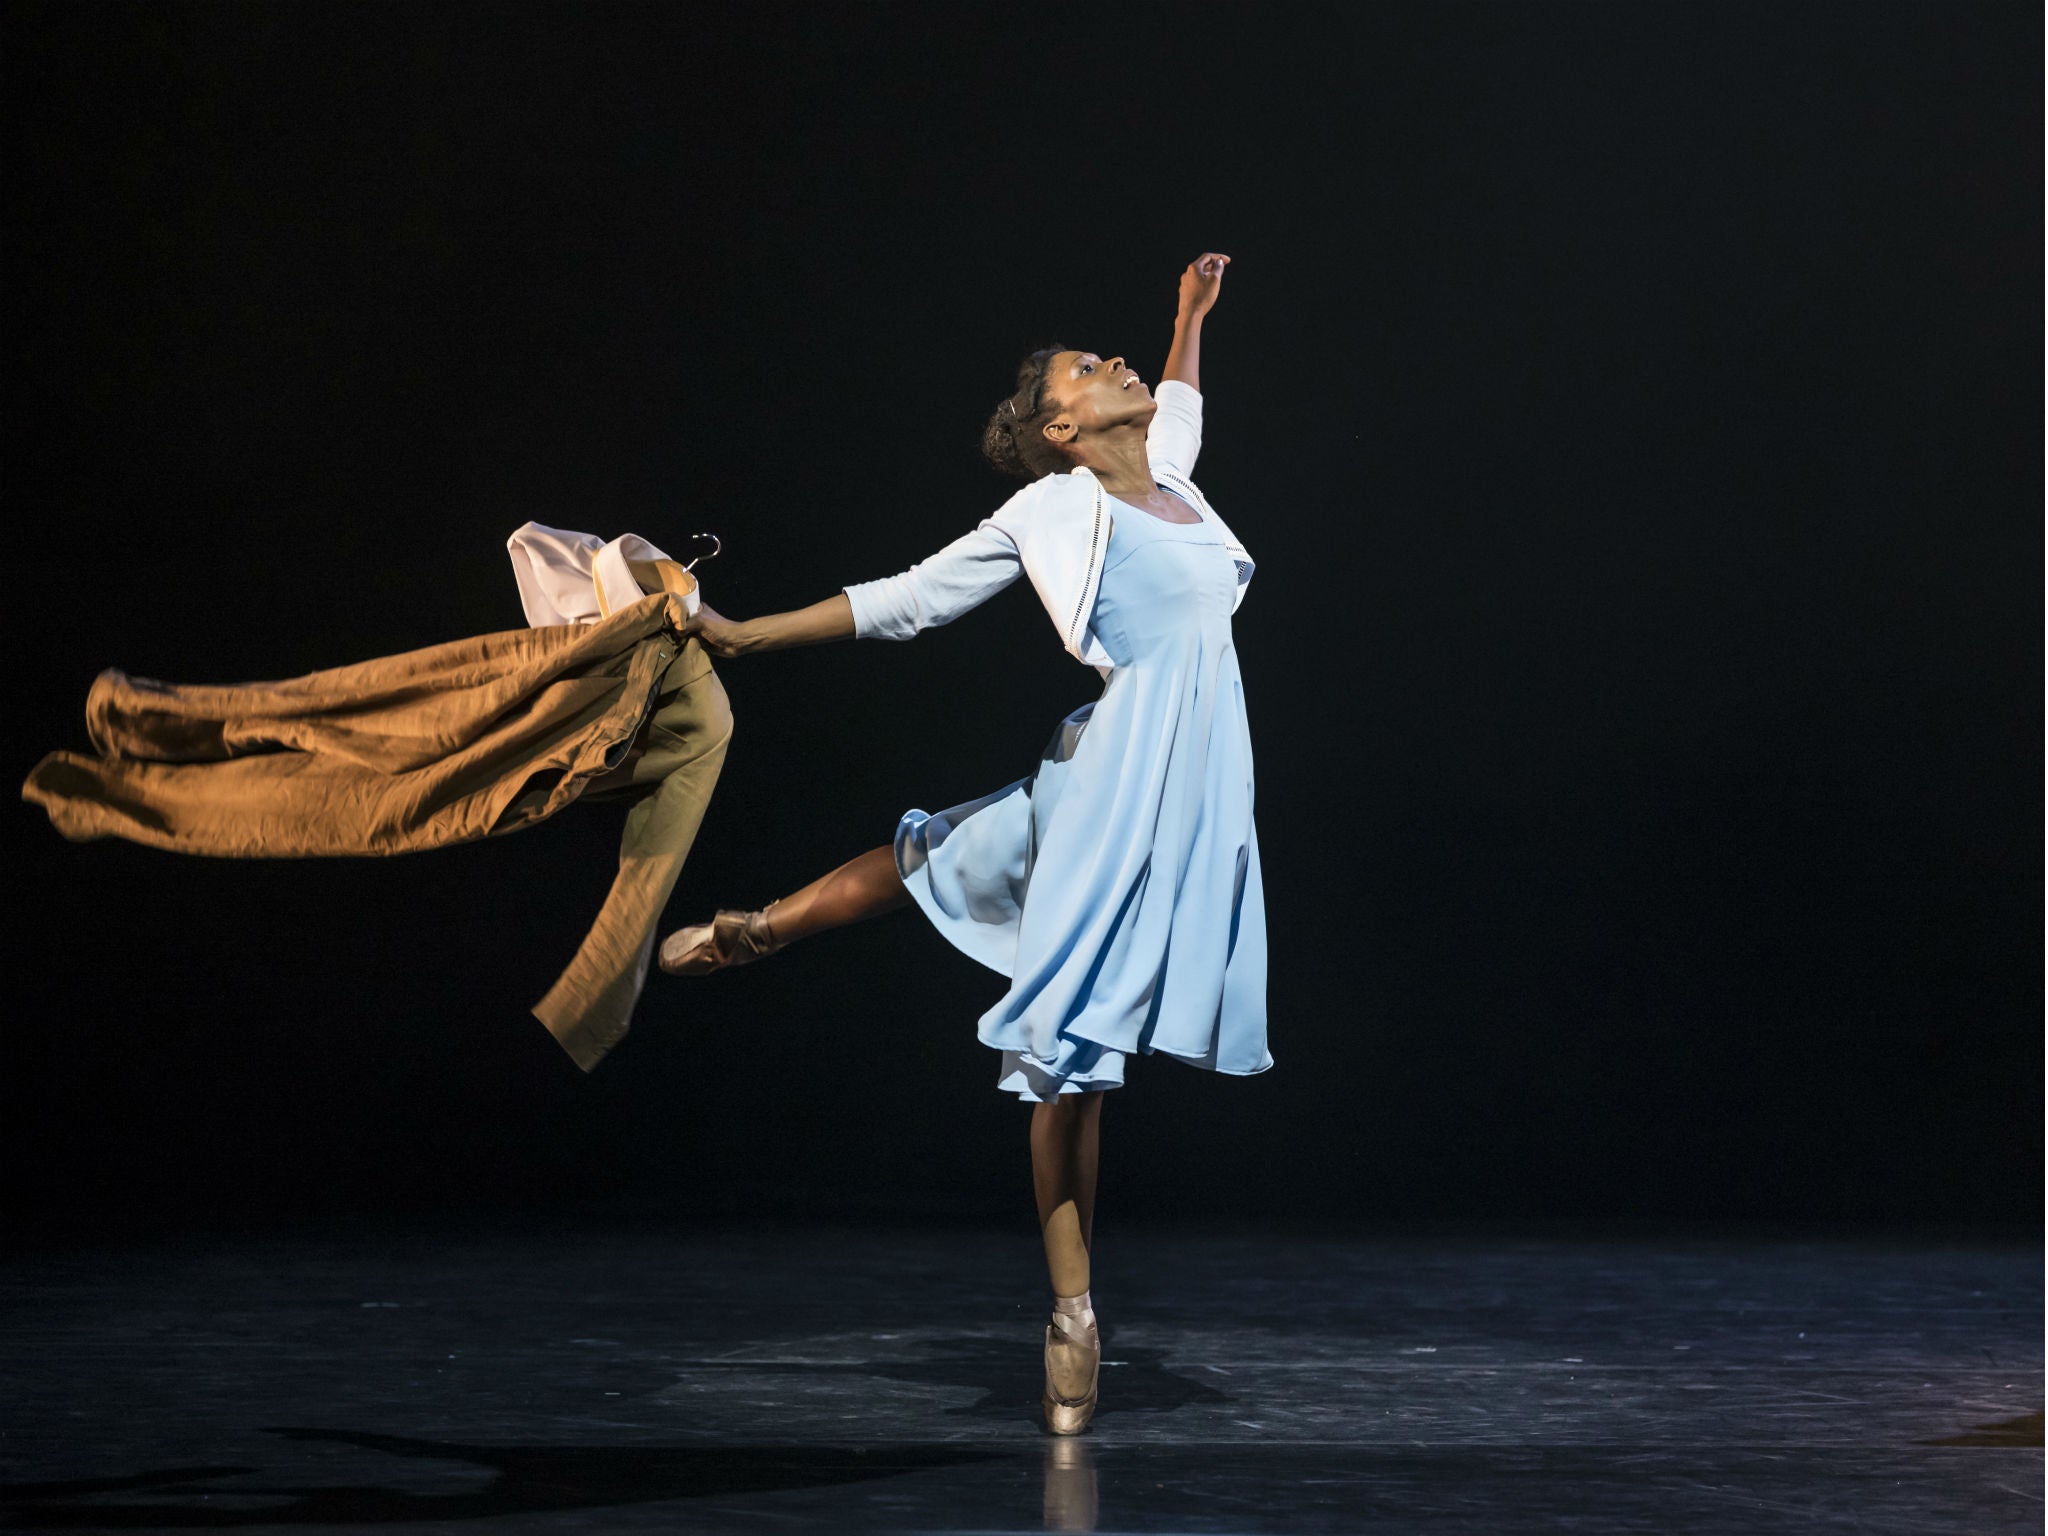 Cira Robinson performs with Ballet Black in Cathy Marston's 'The Suit' at the Barbican